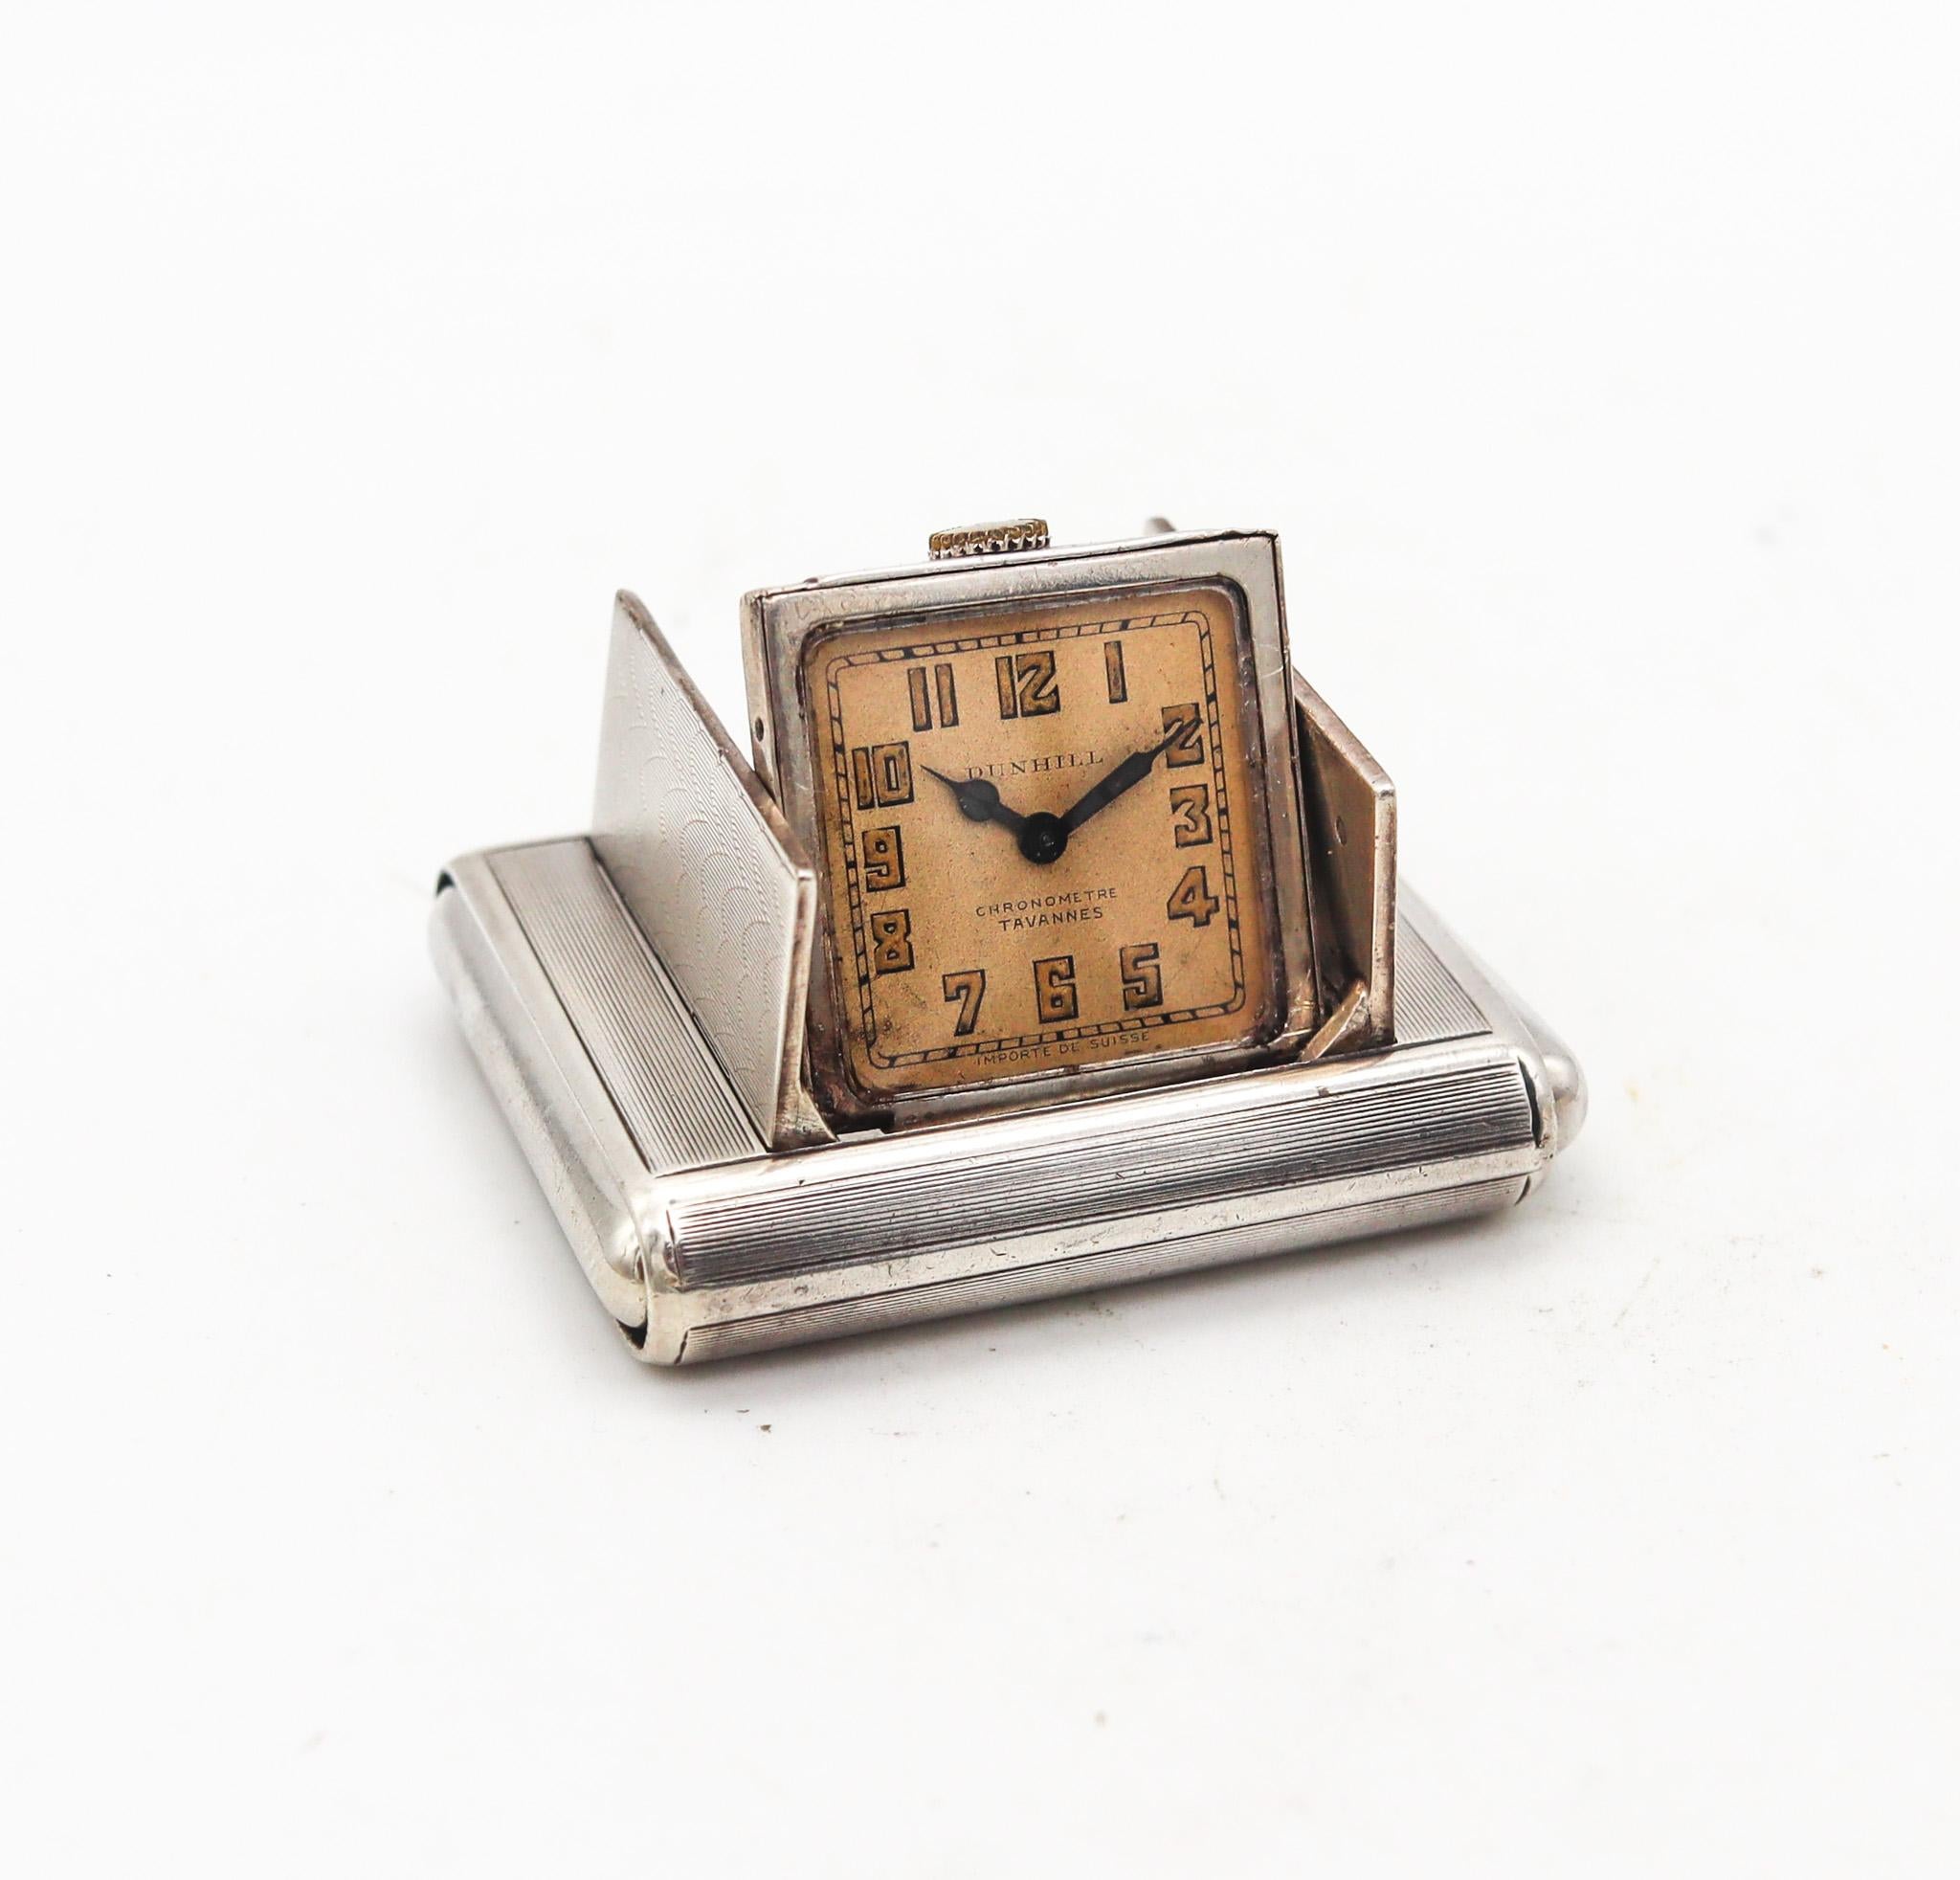 Art deco La Captive travel-purse clock designed for Alfred Dunhill.

Beautiful and very unusual squeeze concealed 